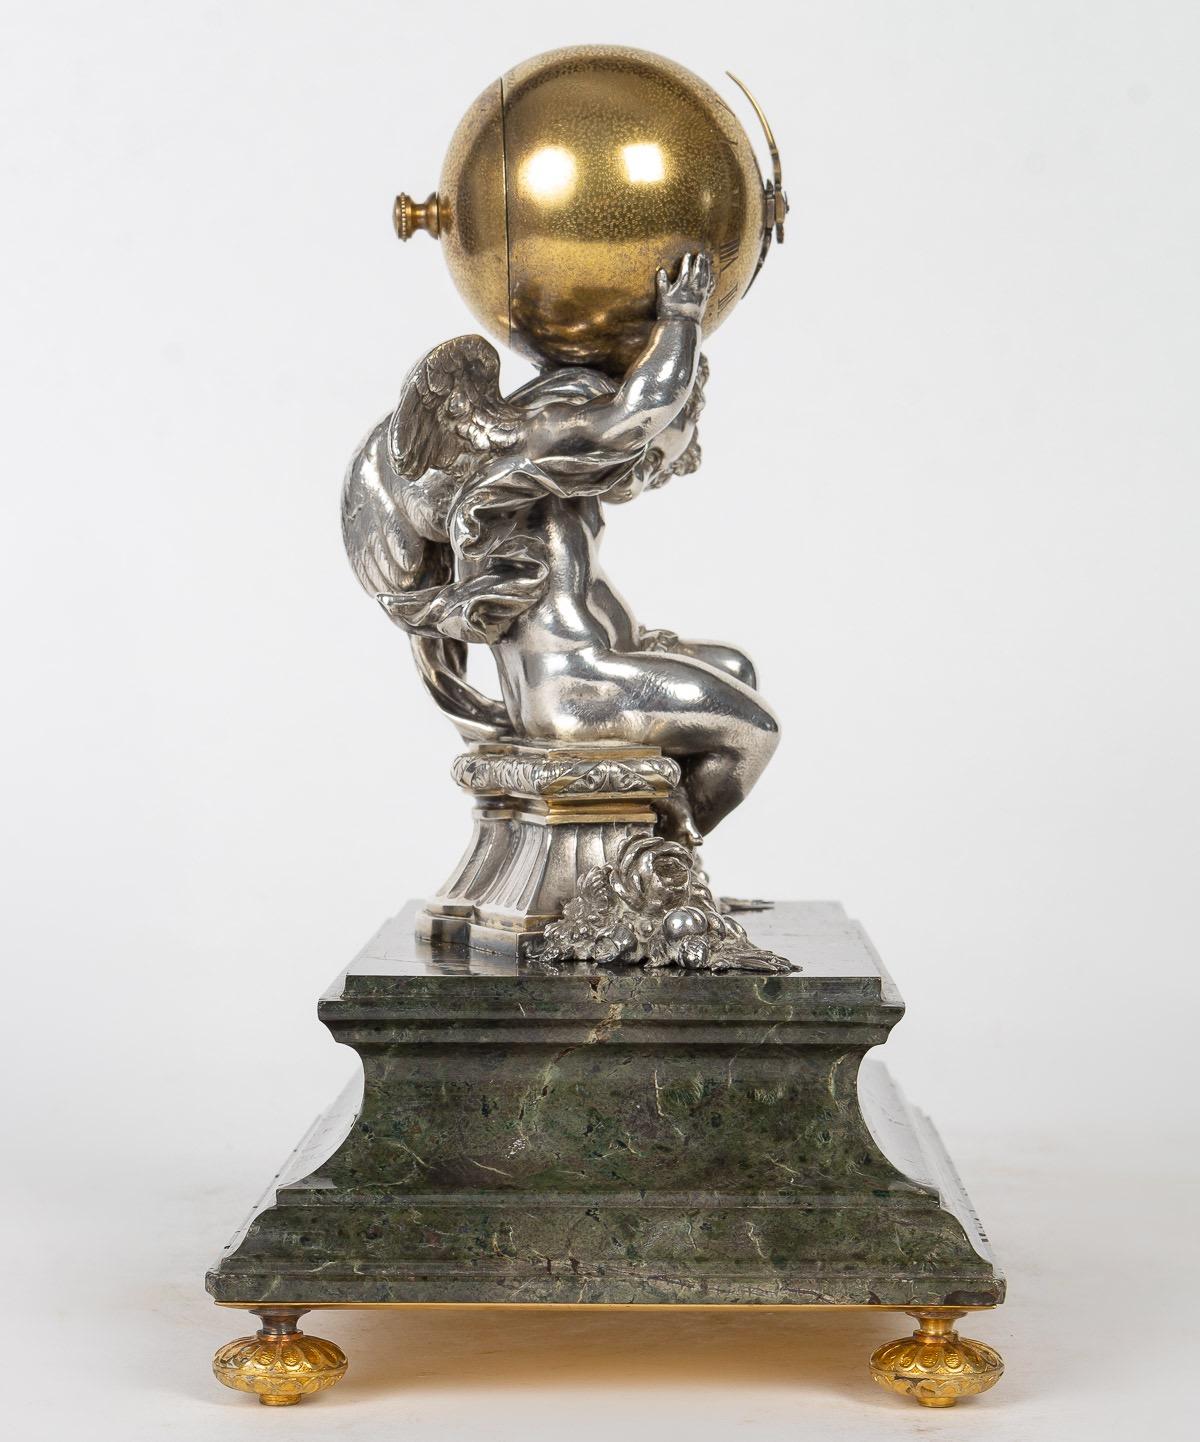 Fannières Frères Desk Clock Time Allegory

Chased gilt and silvered bronze Desk Clock 
With an allegorical theme of Time in the form of a cherub supporting a globe enclosing the movement and indicating the hours engraved in Roman numerals.
he is